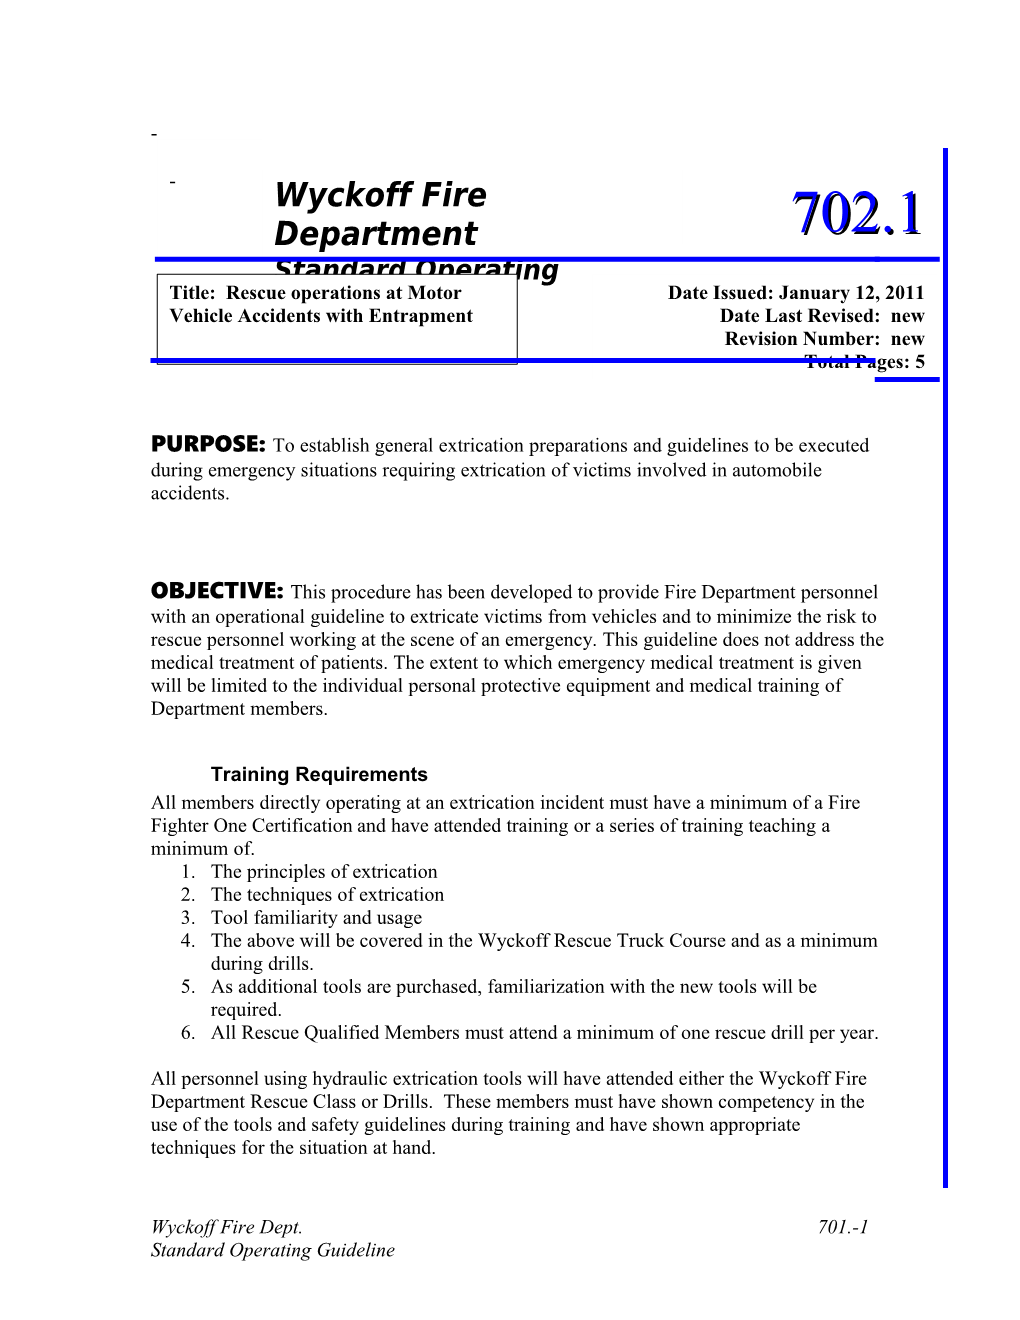 SOG 702.1- Rescue Operations at Motor Vehicle Accidents with Entrapment